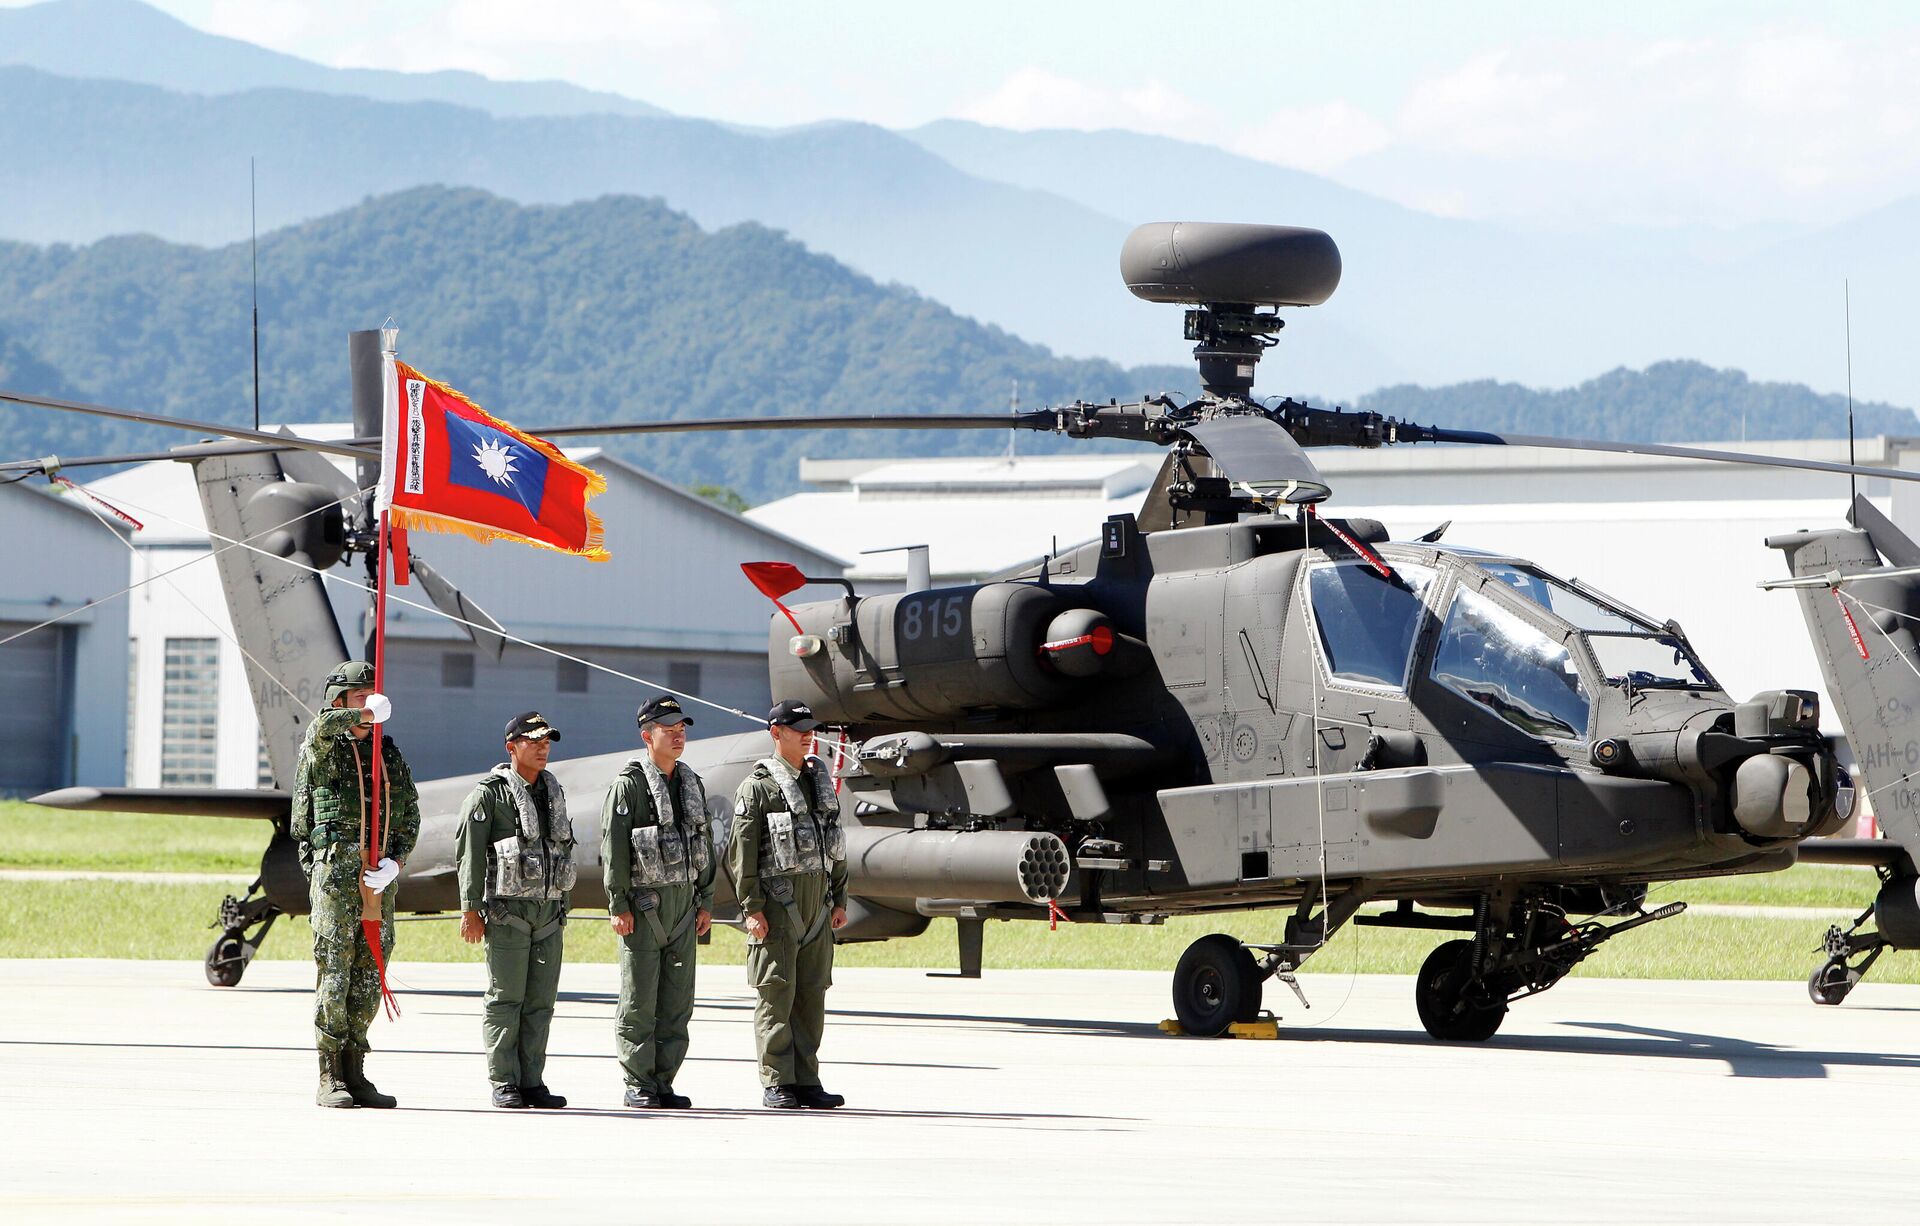 Pilots stand in front of AH-64E Apache attack helicopter before the commissioning ceremony in Taoyuan city, northern Taiwan, Tuesday, July 17, 2018 - Sputnik International, 1920, 20.05.2022